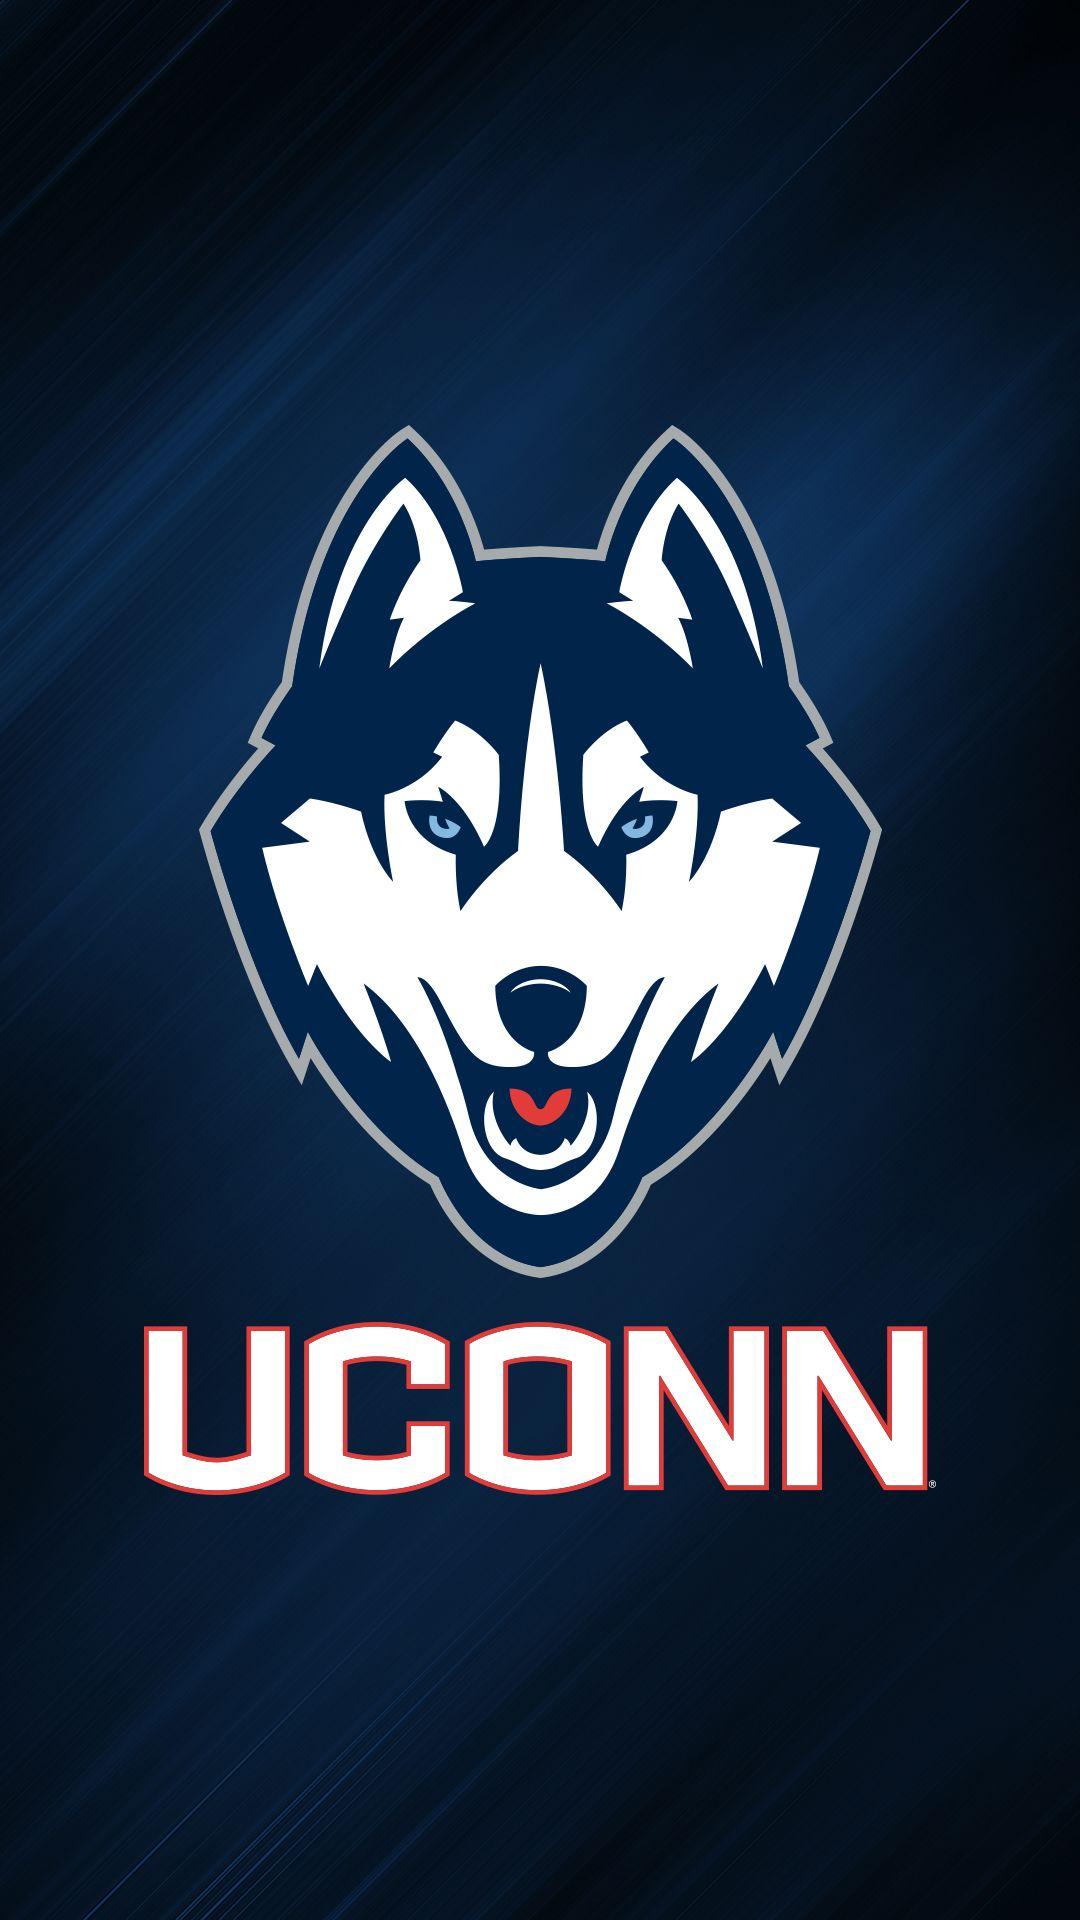 UCONNHUSKIES.COM - University Of Connecticut Official Athletic Site